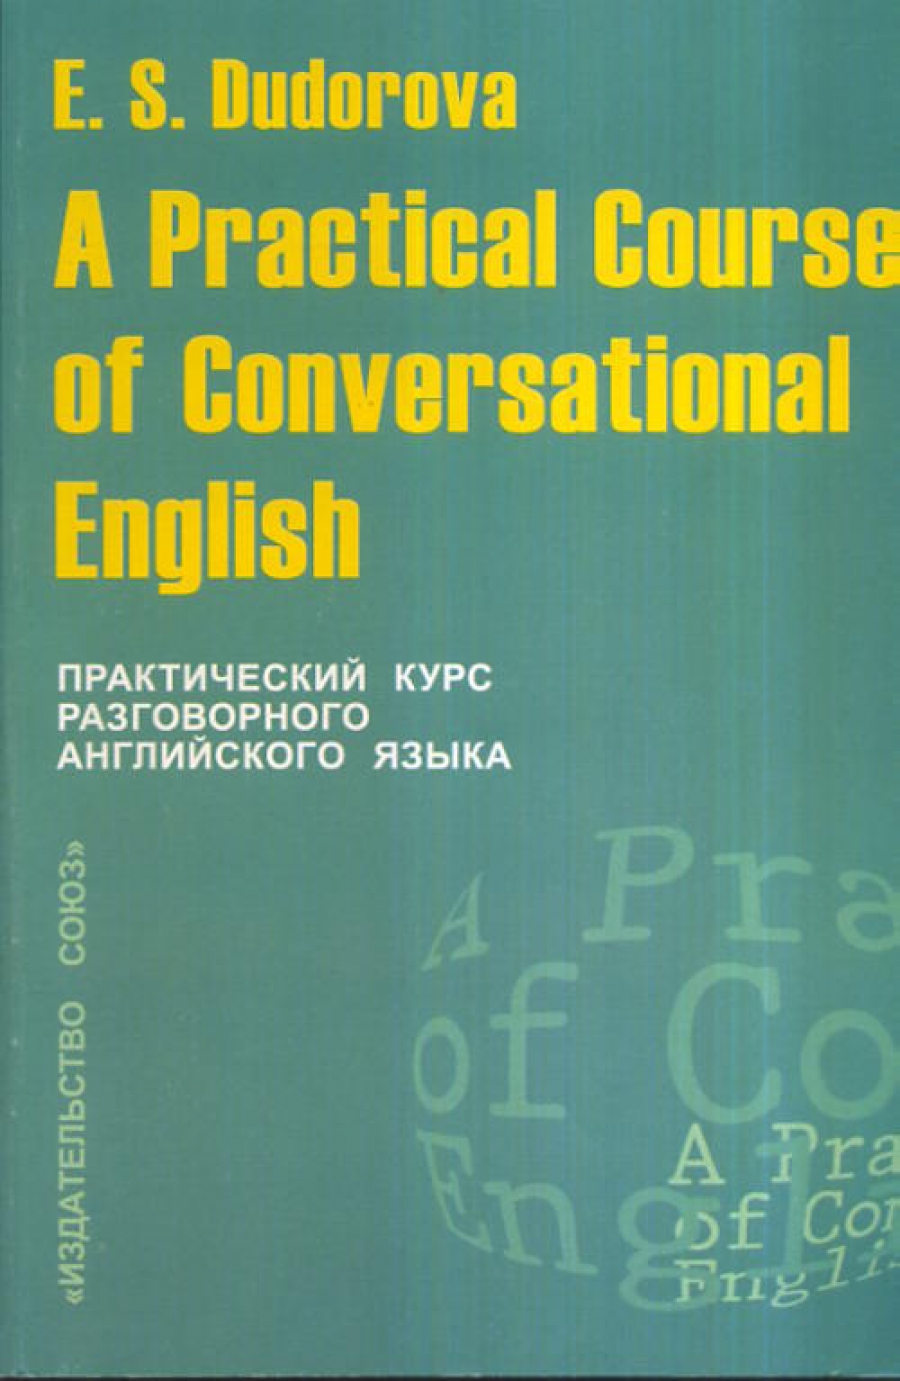  ..     .  Practical Course of Conversational English:  . (  ).  